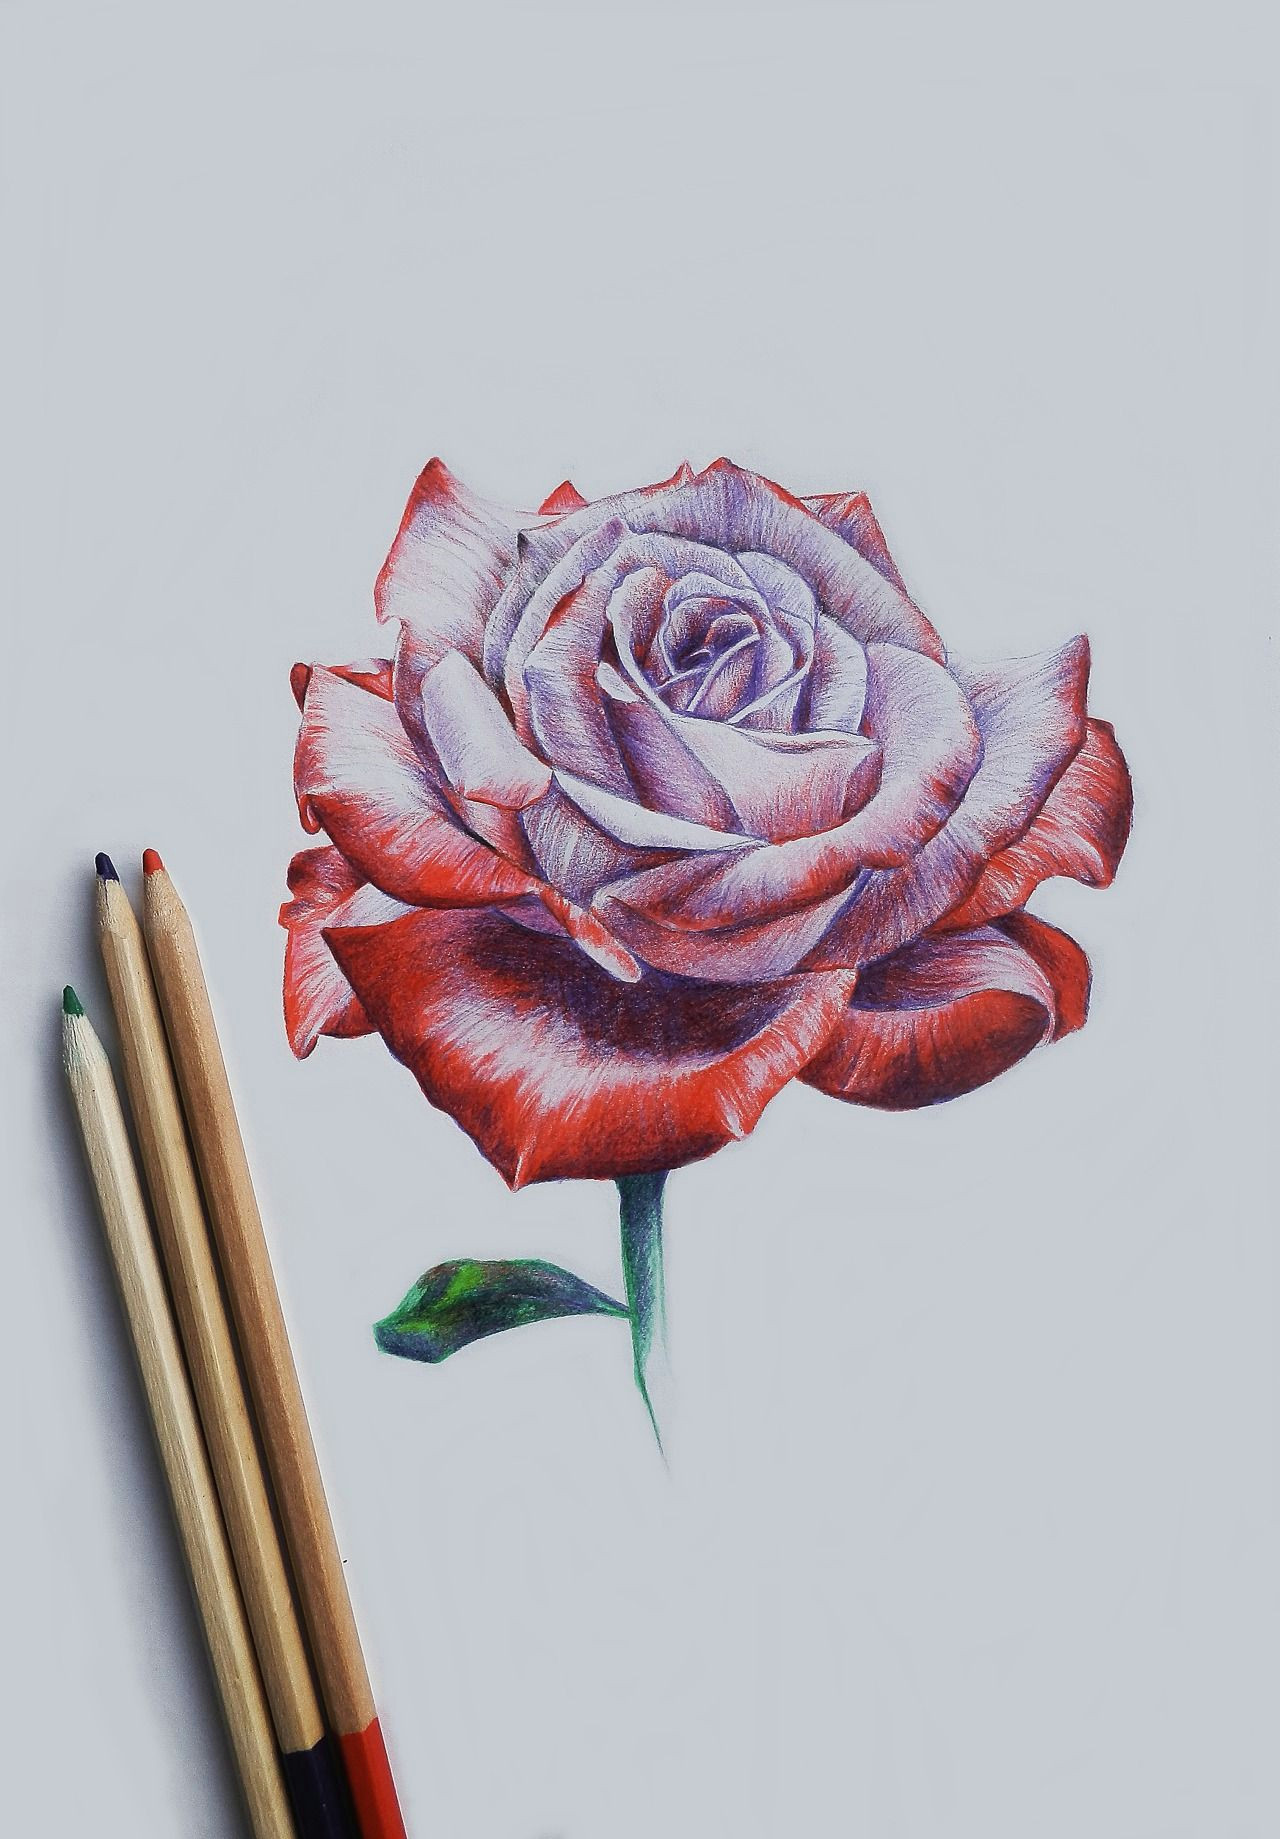 Drawing Realistic Flowers with Colored Pencil Pretty Rose Drawing Colored Pencil Your Pinterest Likes